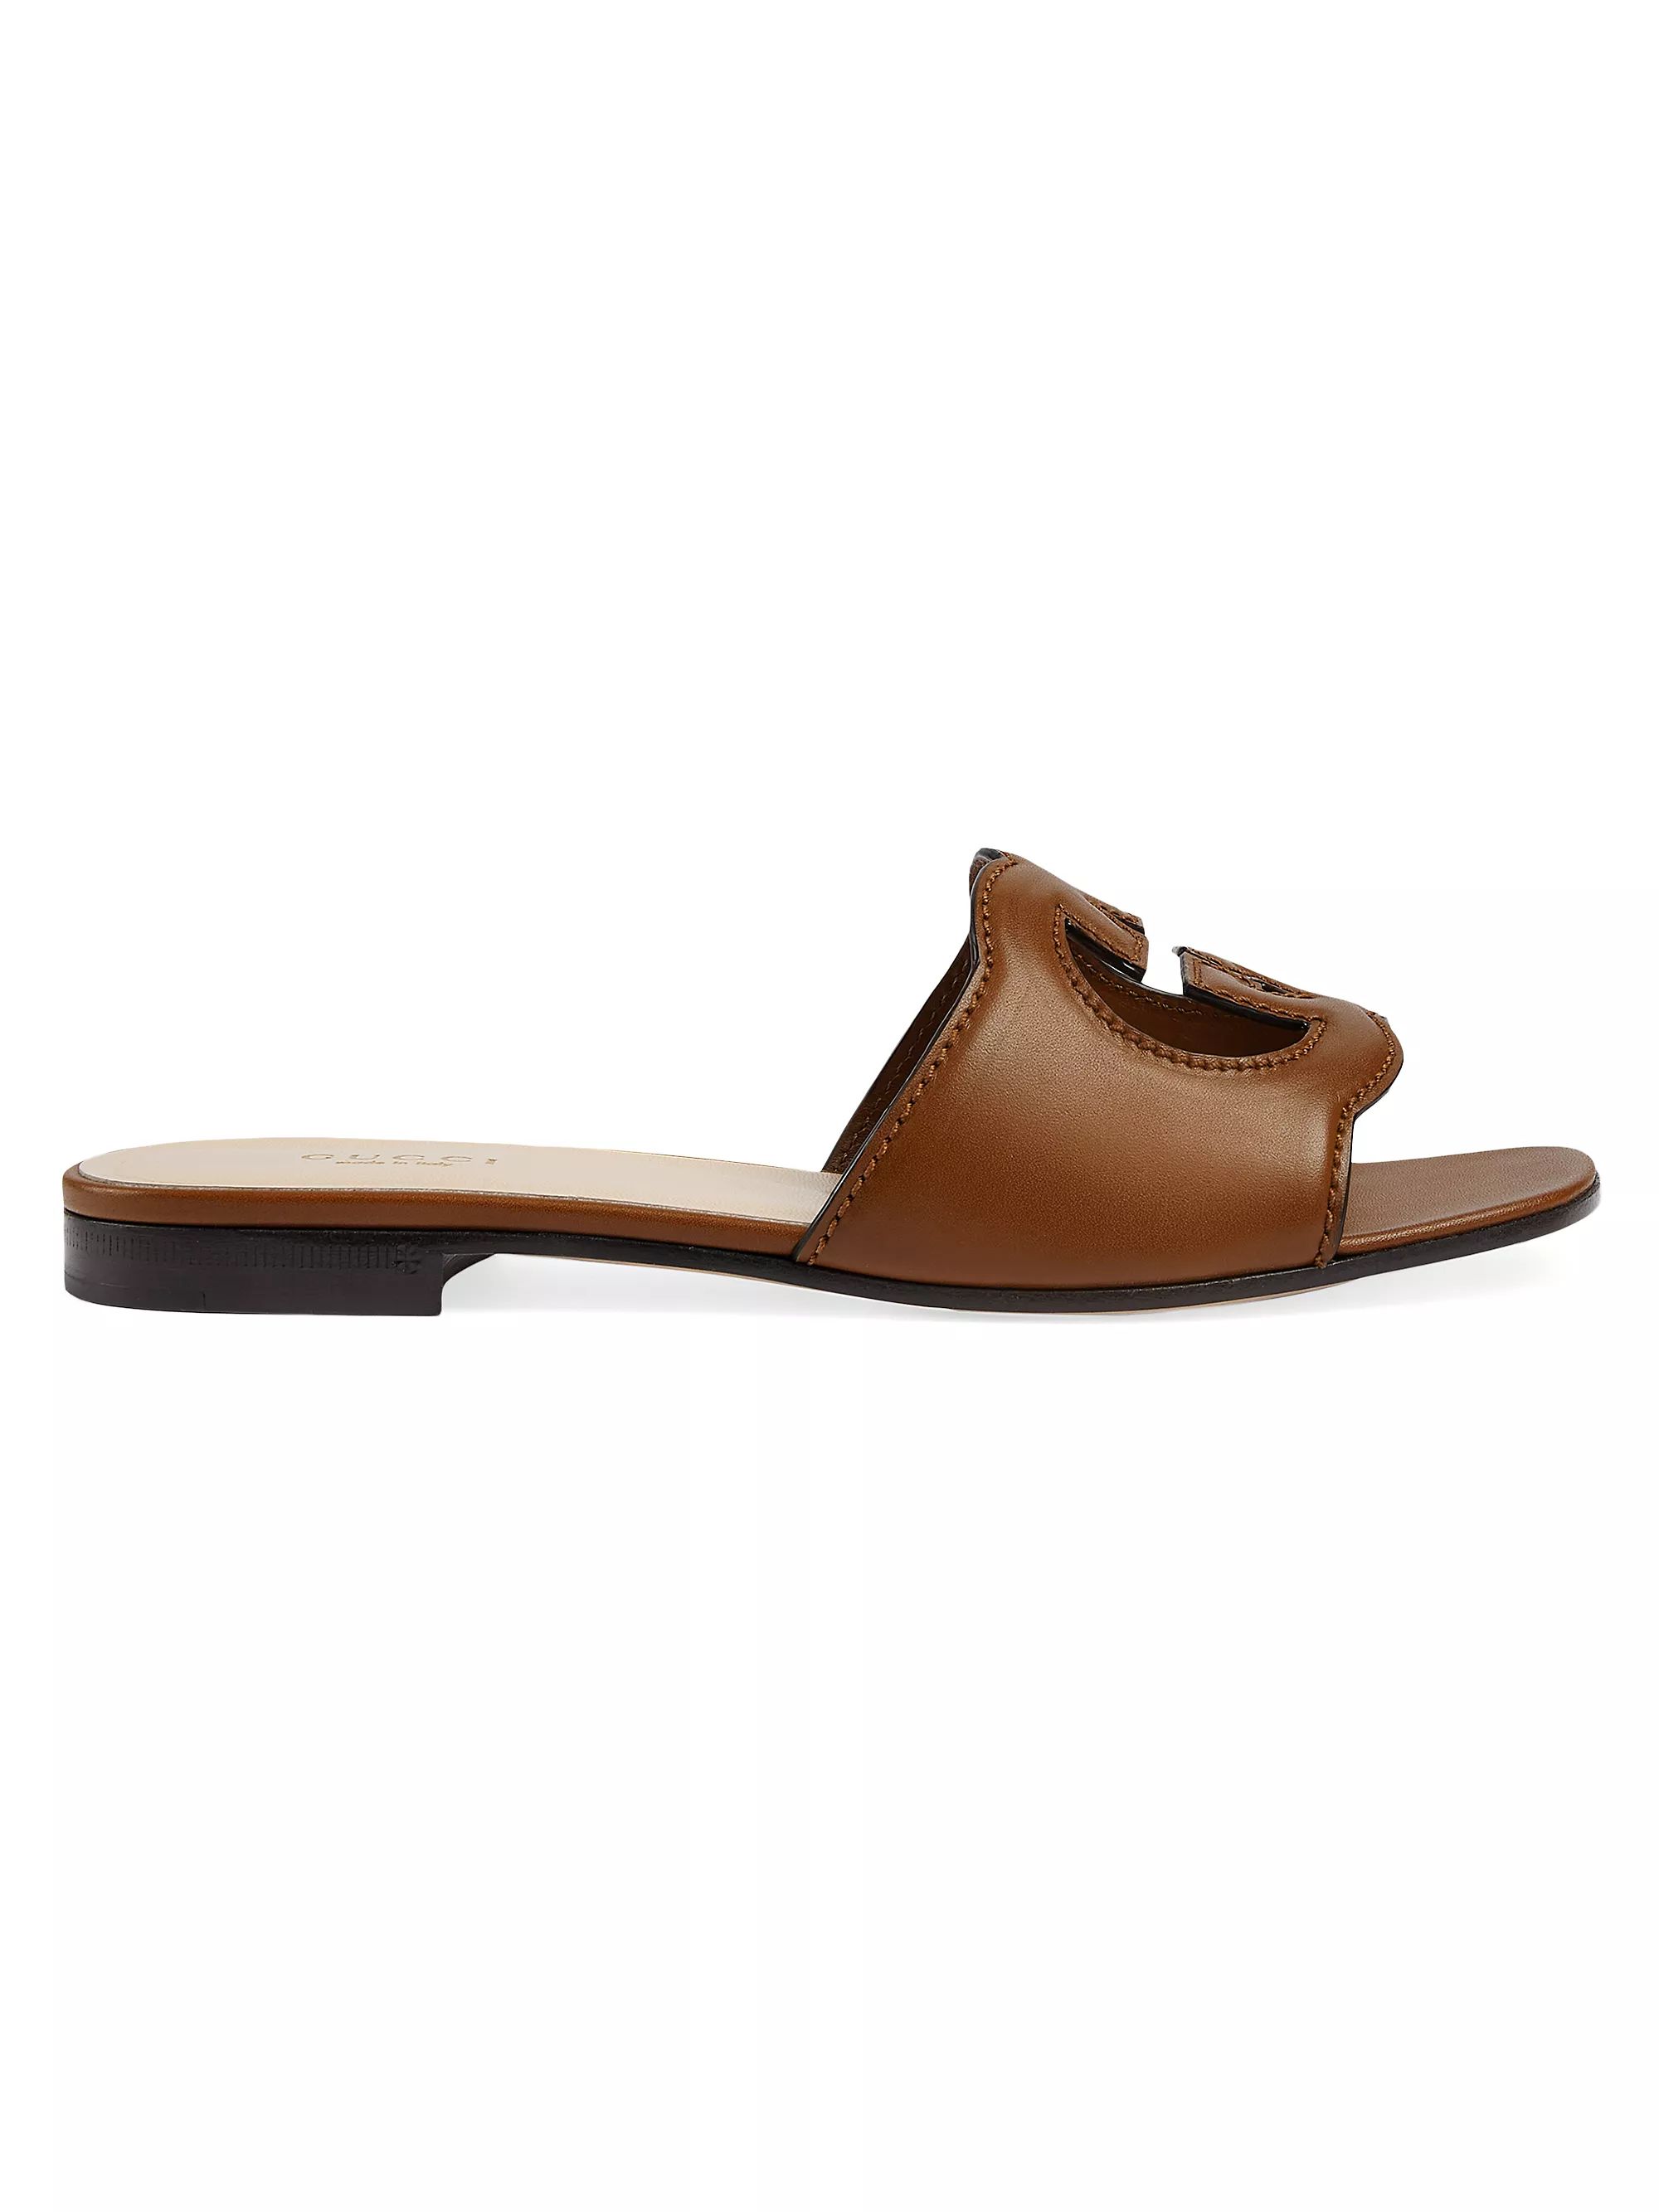 GG Cut-Out Leather Slides | Saks Fifth Avenue